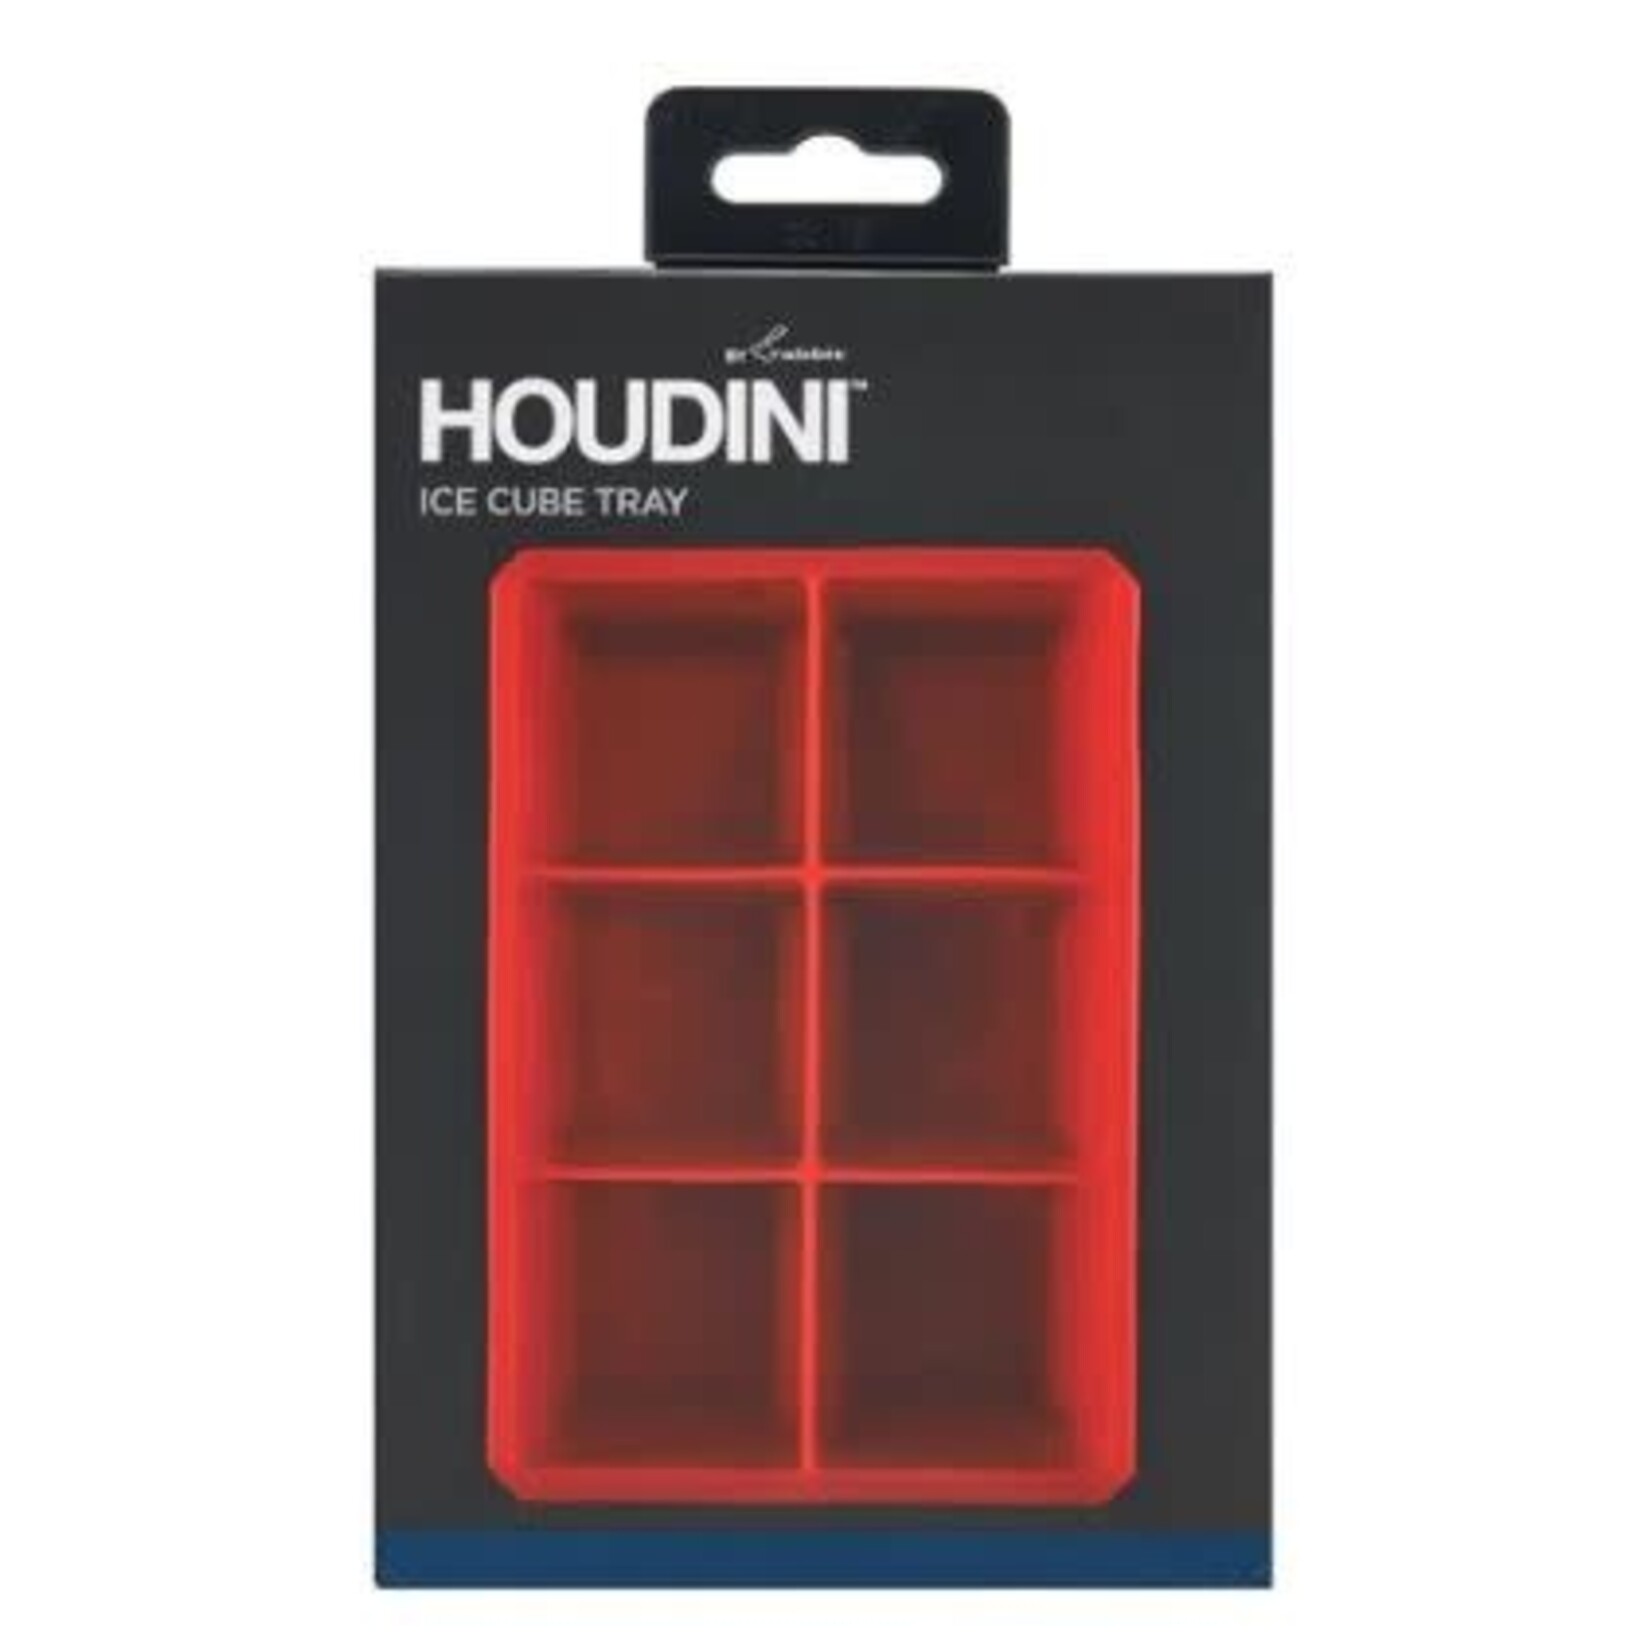 Rabbit Houdini by Rabbit 6-Cube Ice Cube Mold - Tray Red Color